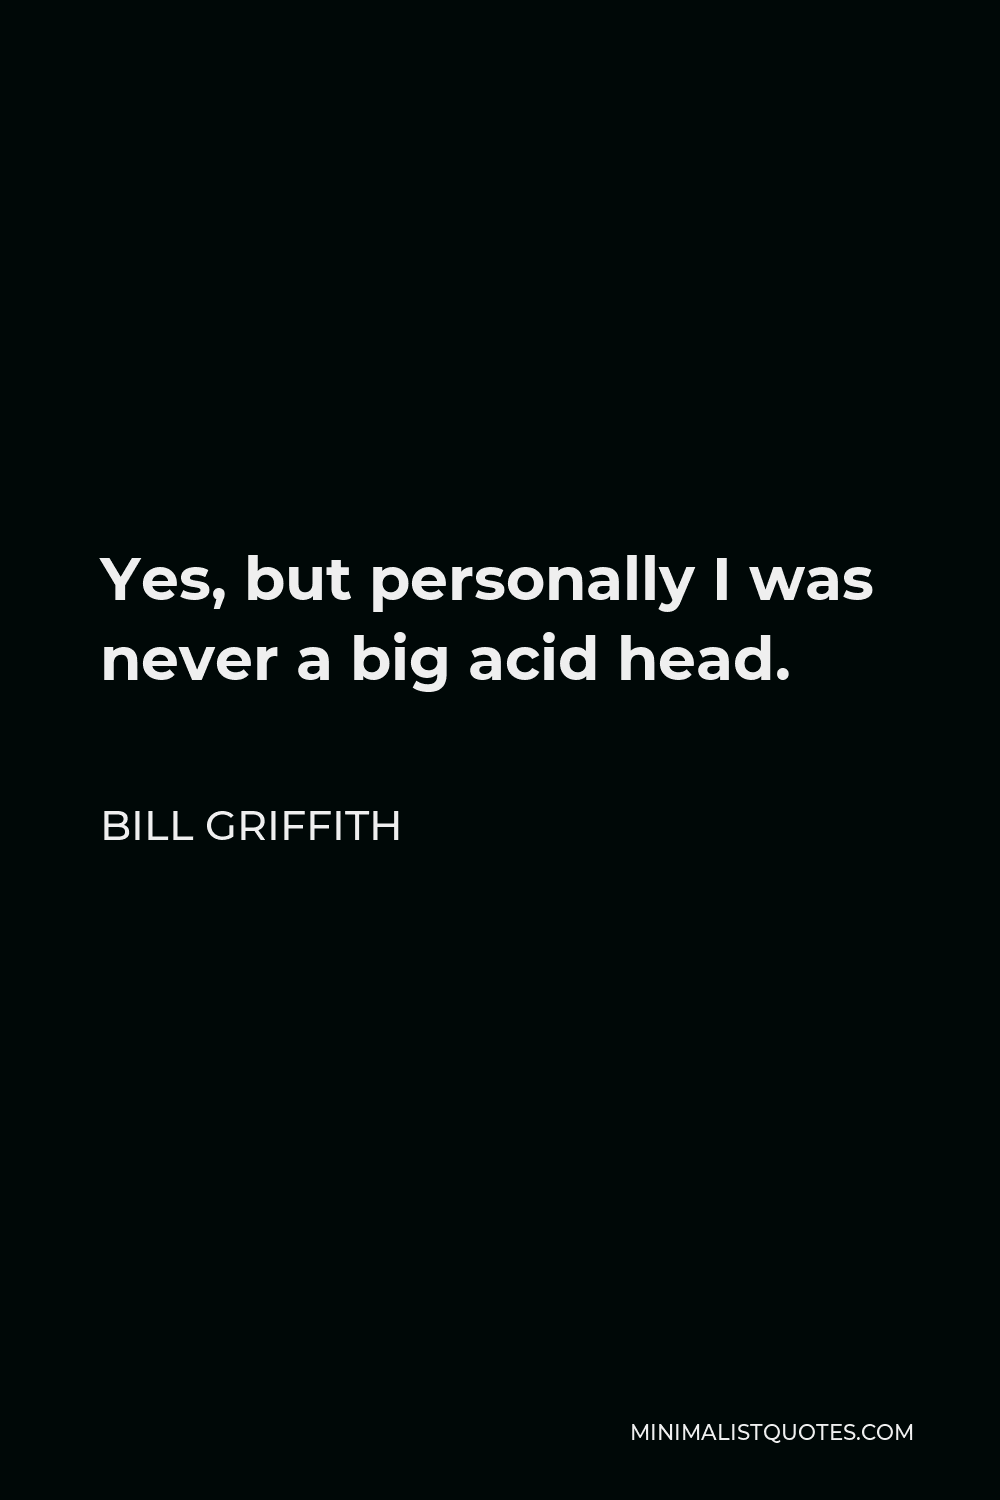 Bill Griffith Quote - Yes, but personally I was never a big acid head.